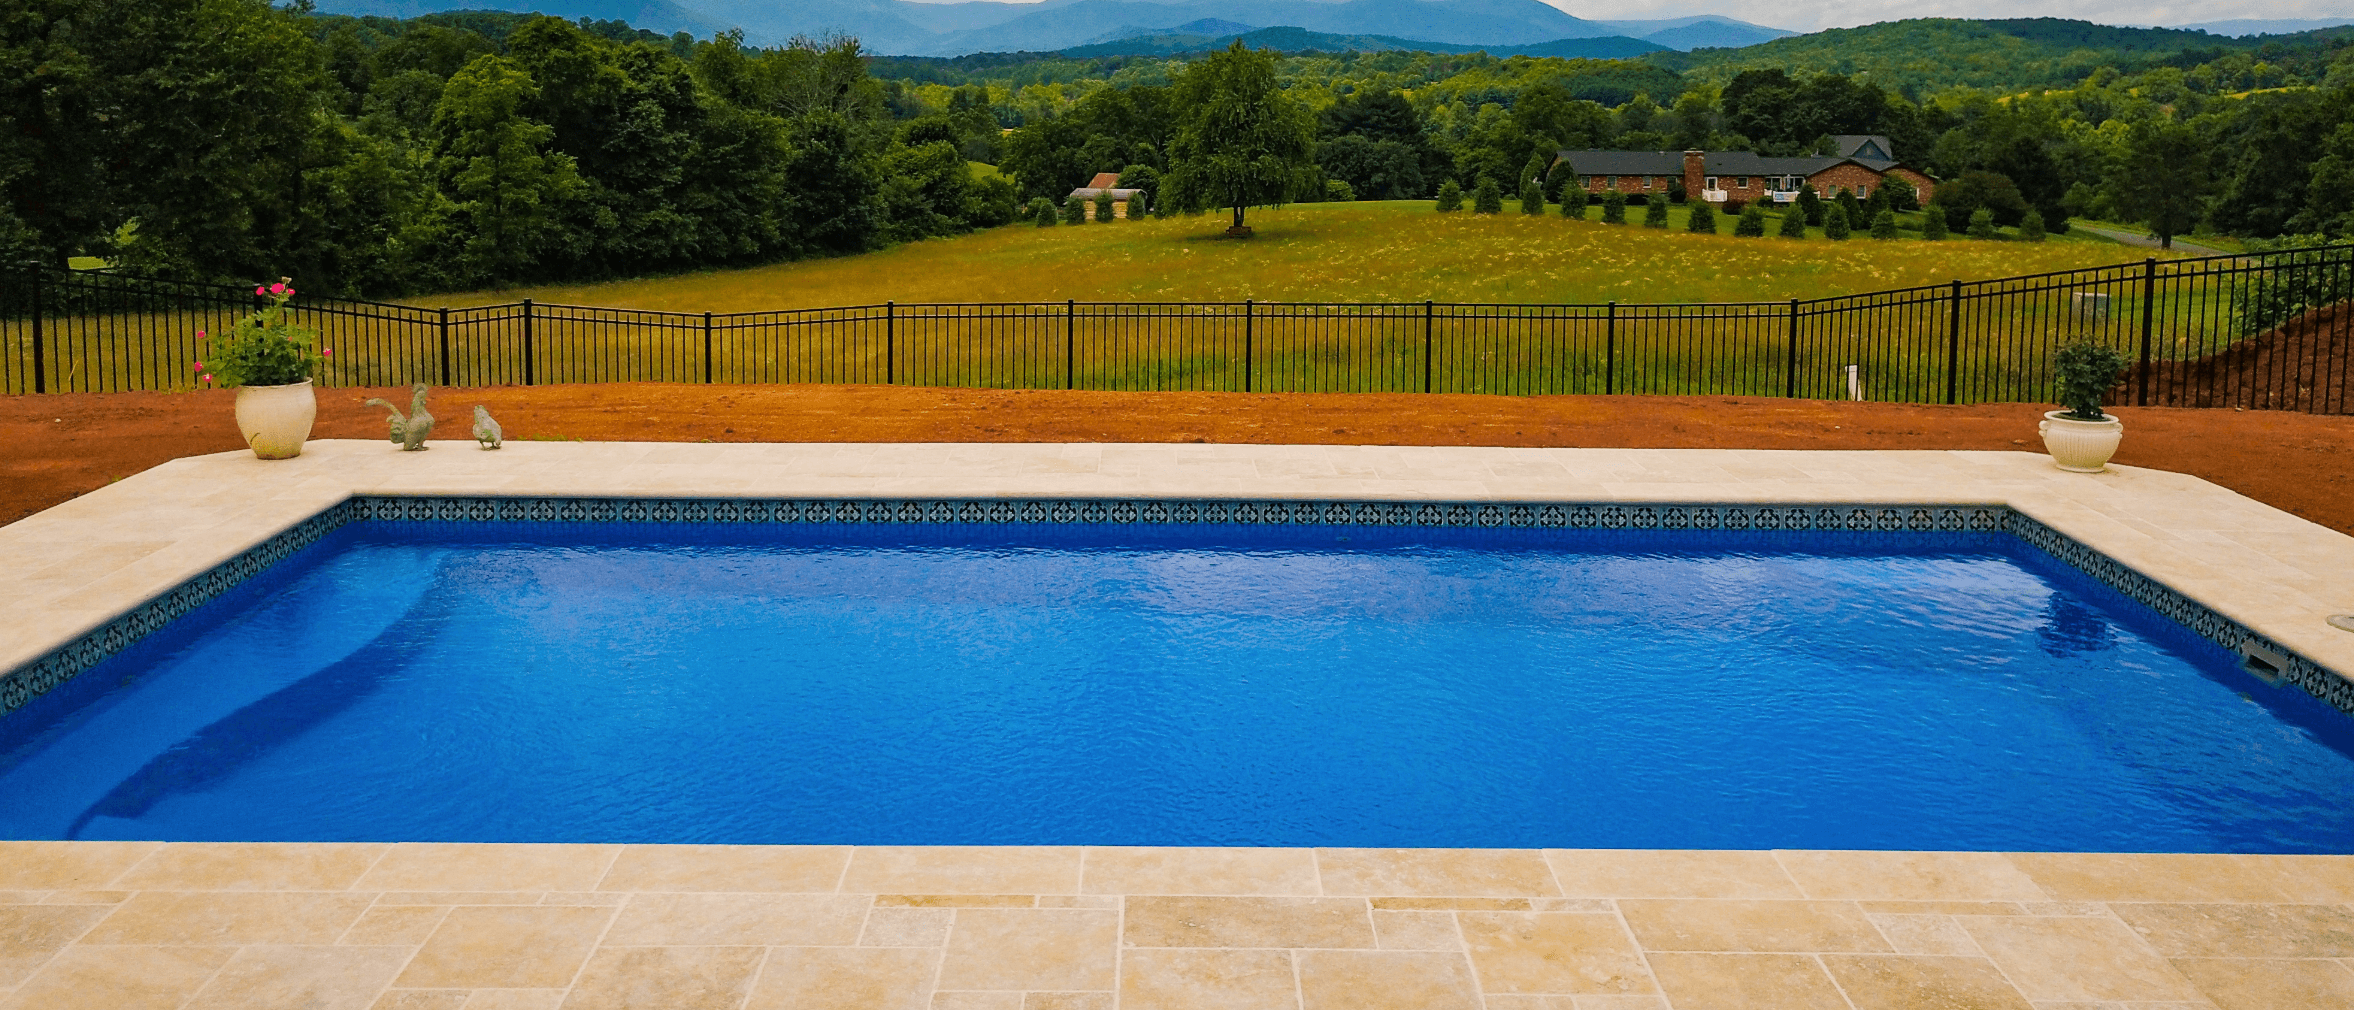 An Honest Look at Fiberglass Inground Pool Prices and Monthly Pool Payments in 2021